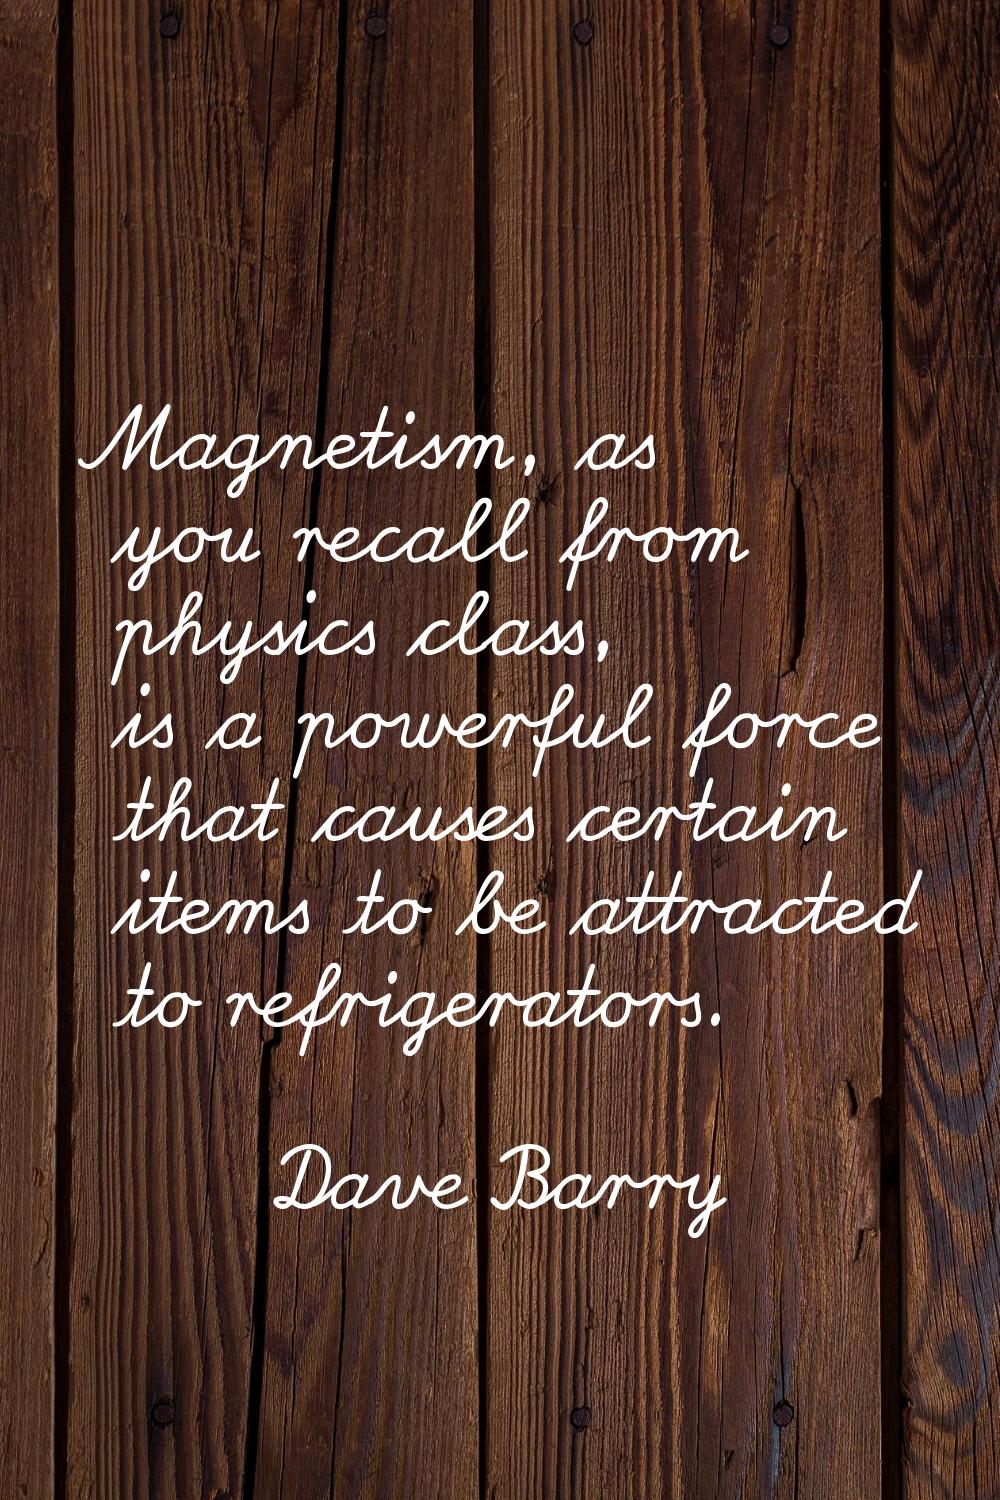 Magnetism, as you recall from physics class, is a powerful force that causes certain items to be at